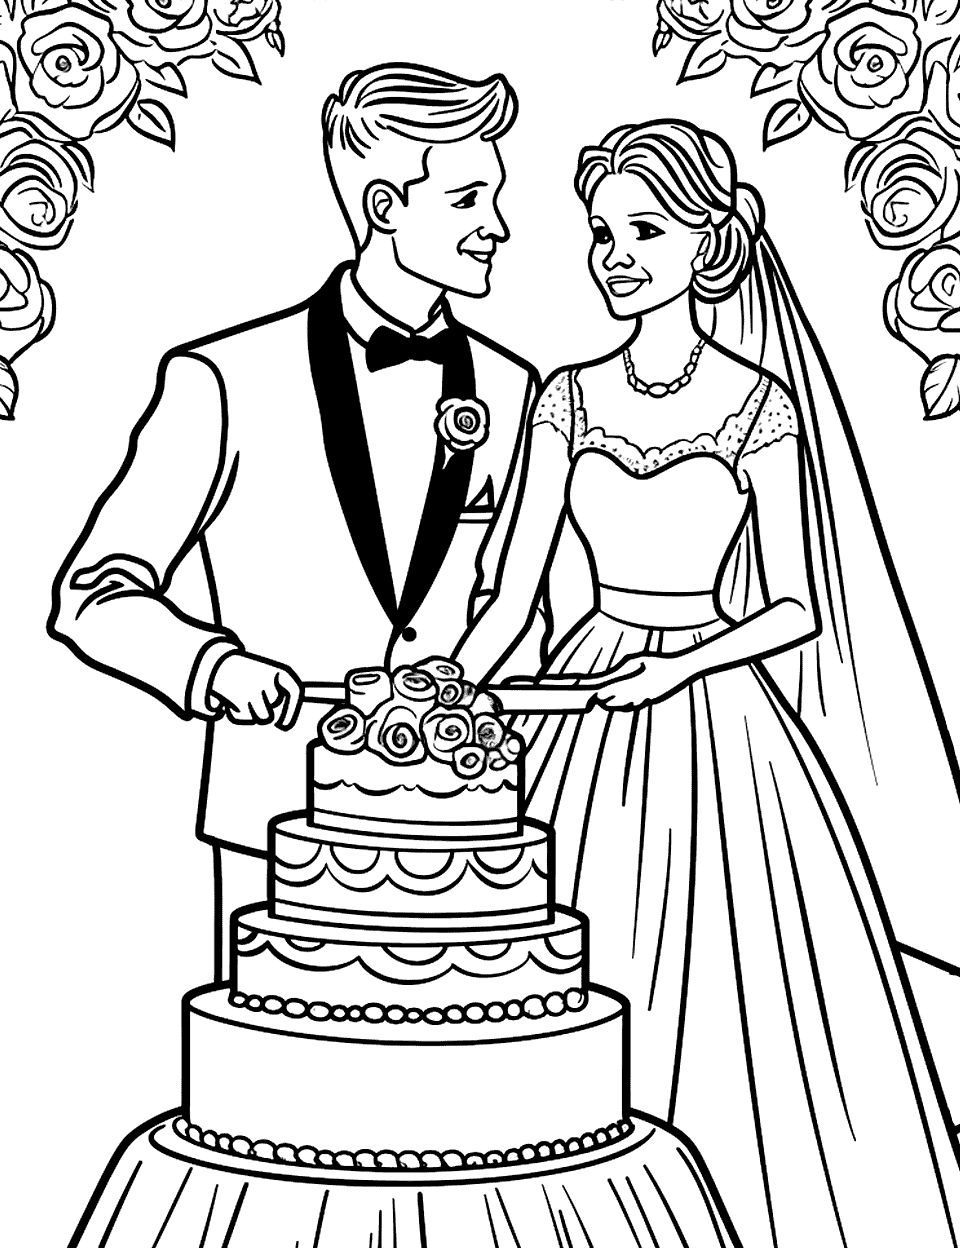 Cake Cutting Ceremony Wedding Coloring Page - A bride and groom cutting a beautifully decorated wedding cake together.